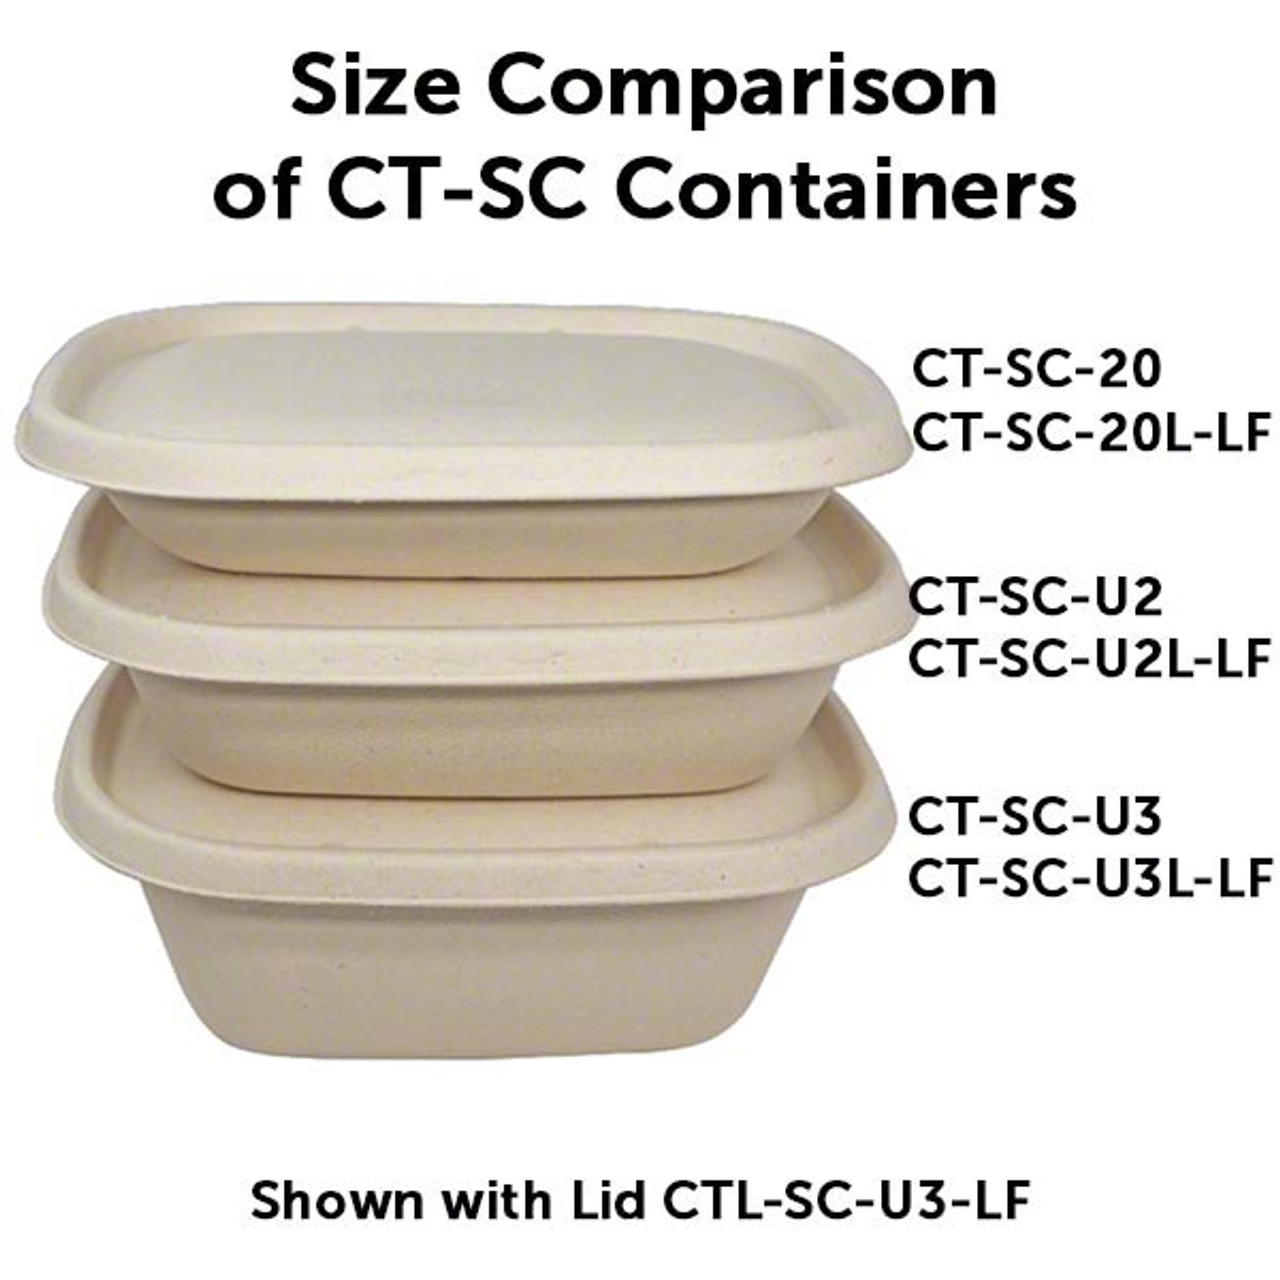 Food Storage Containers, Round, Large, 2-Ct., 48-oz.